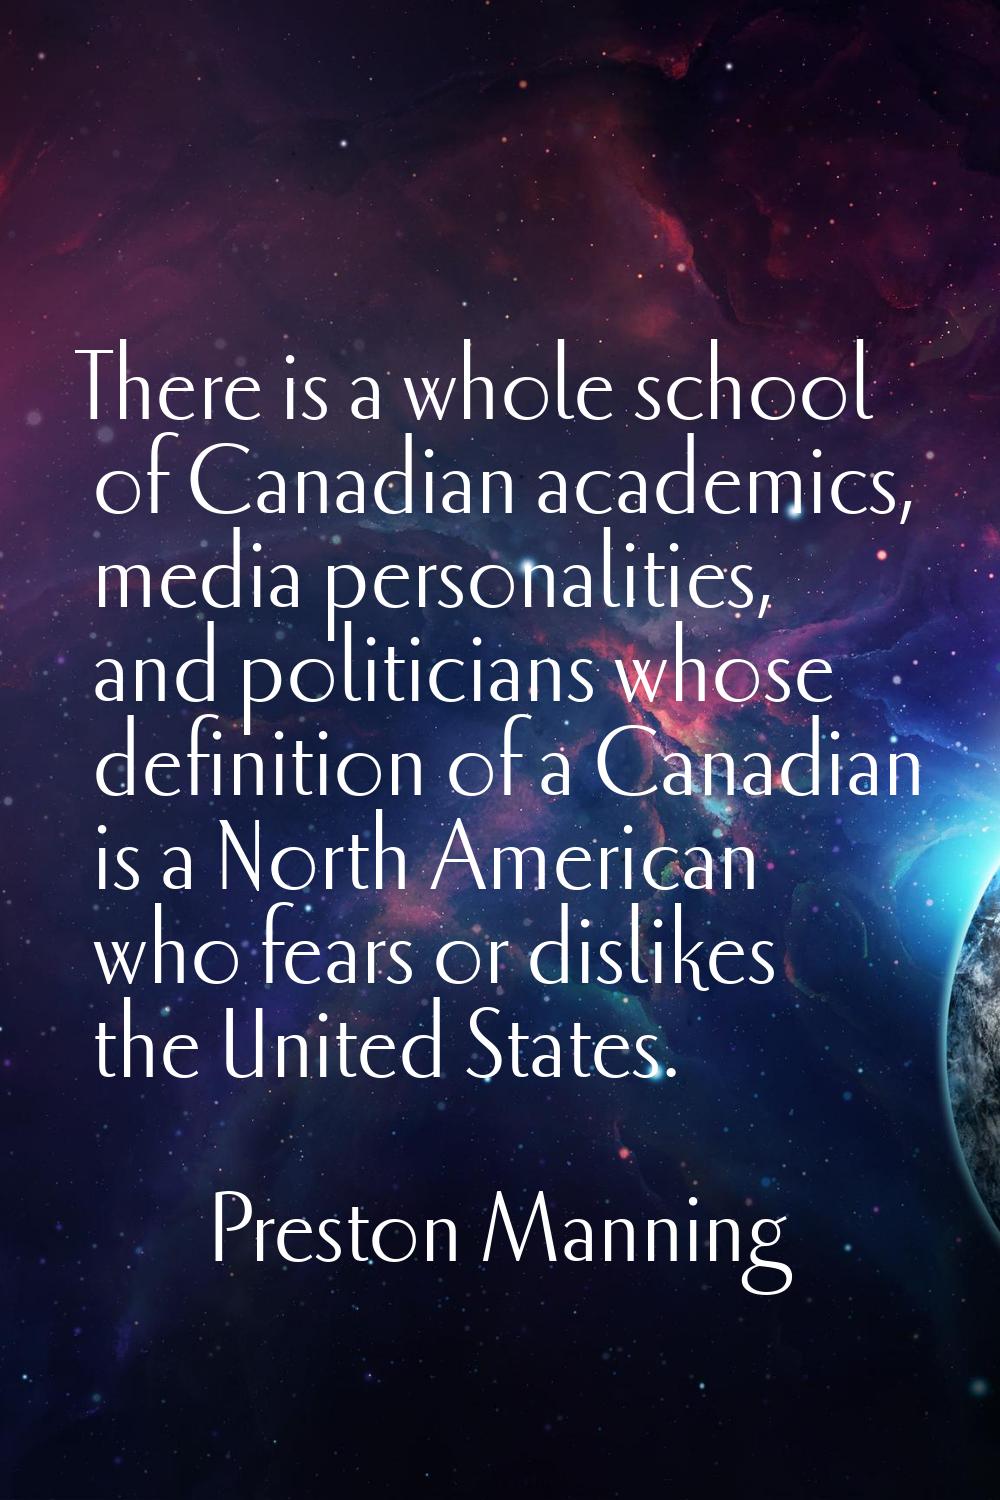 There is a whole school of Canadian academics, media personalities, and politicians whose definitio